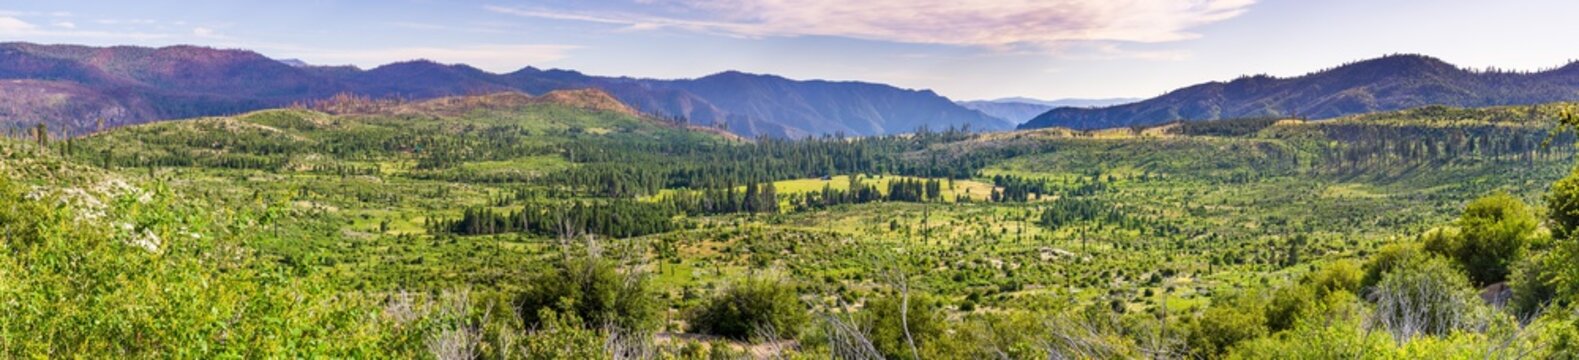 Panoramic view of beautiful green meadows and forests in Yosemite National Park, Sierra Nevada mountains, California